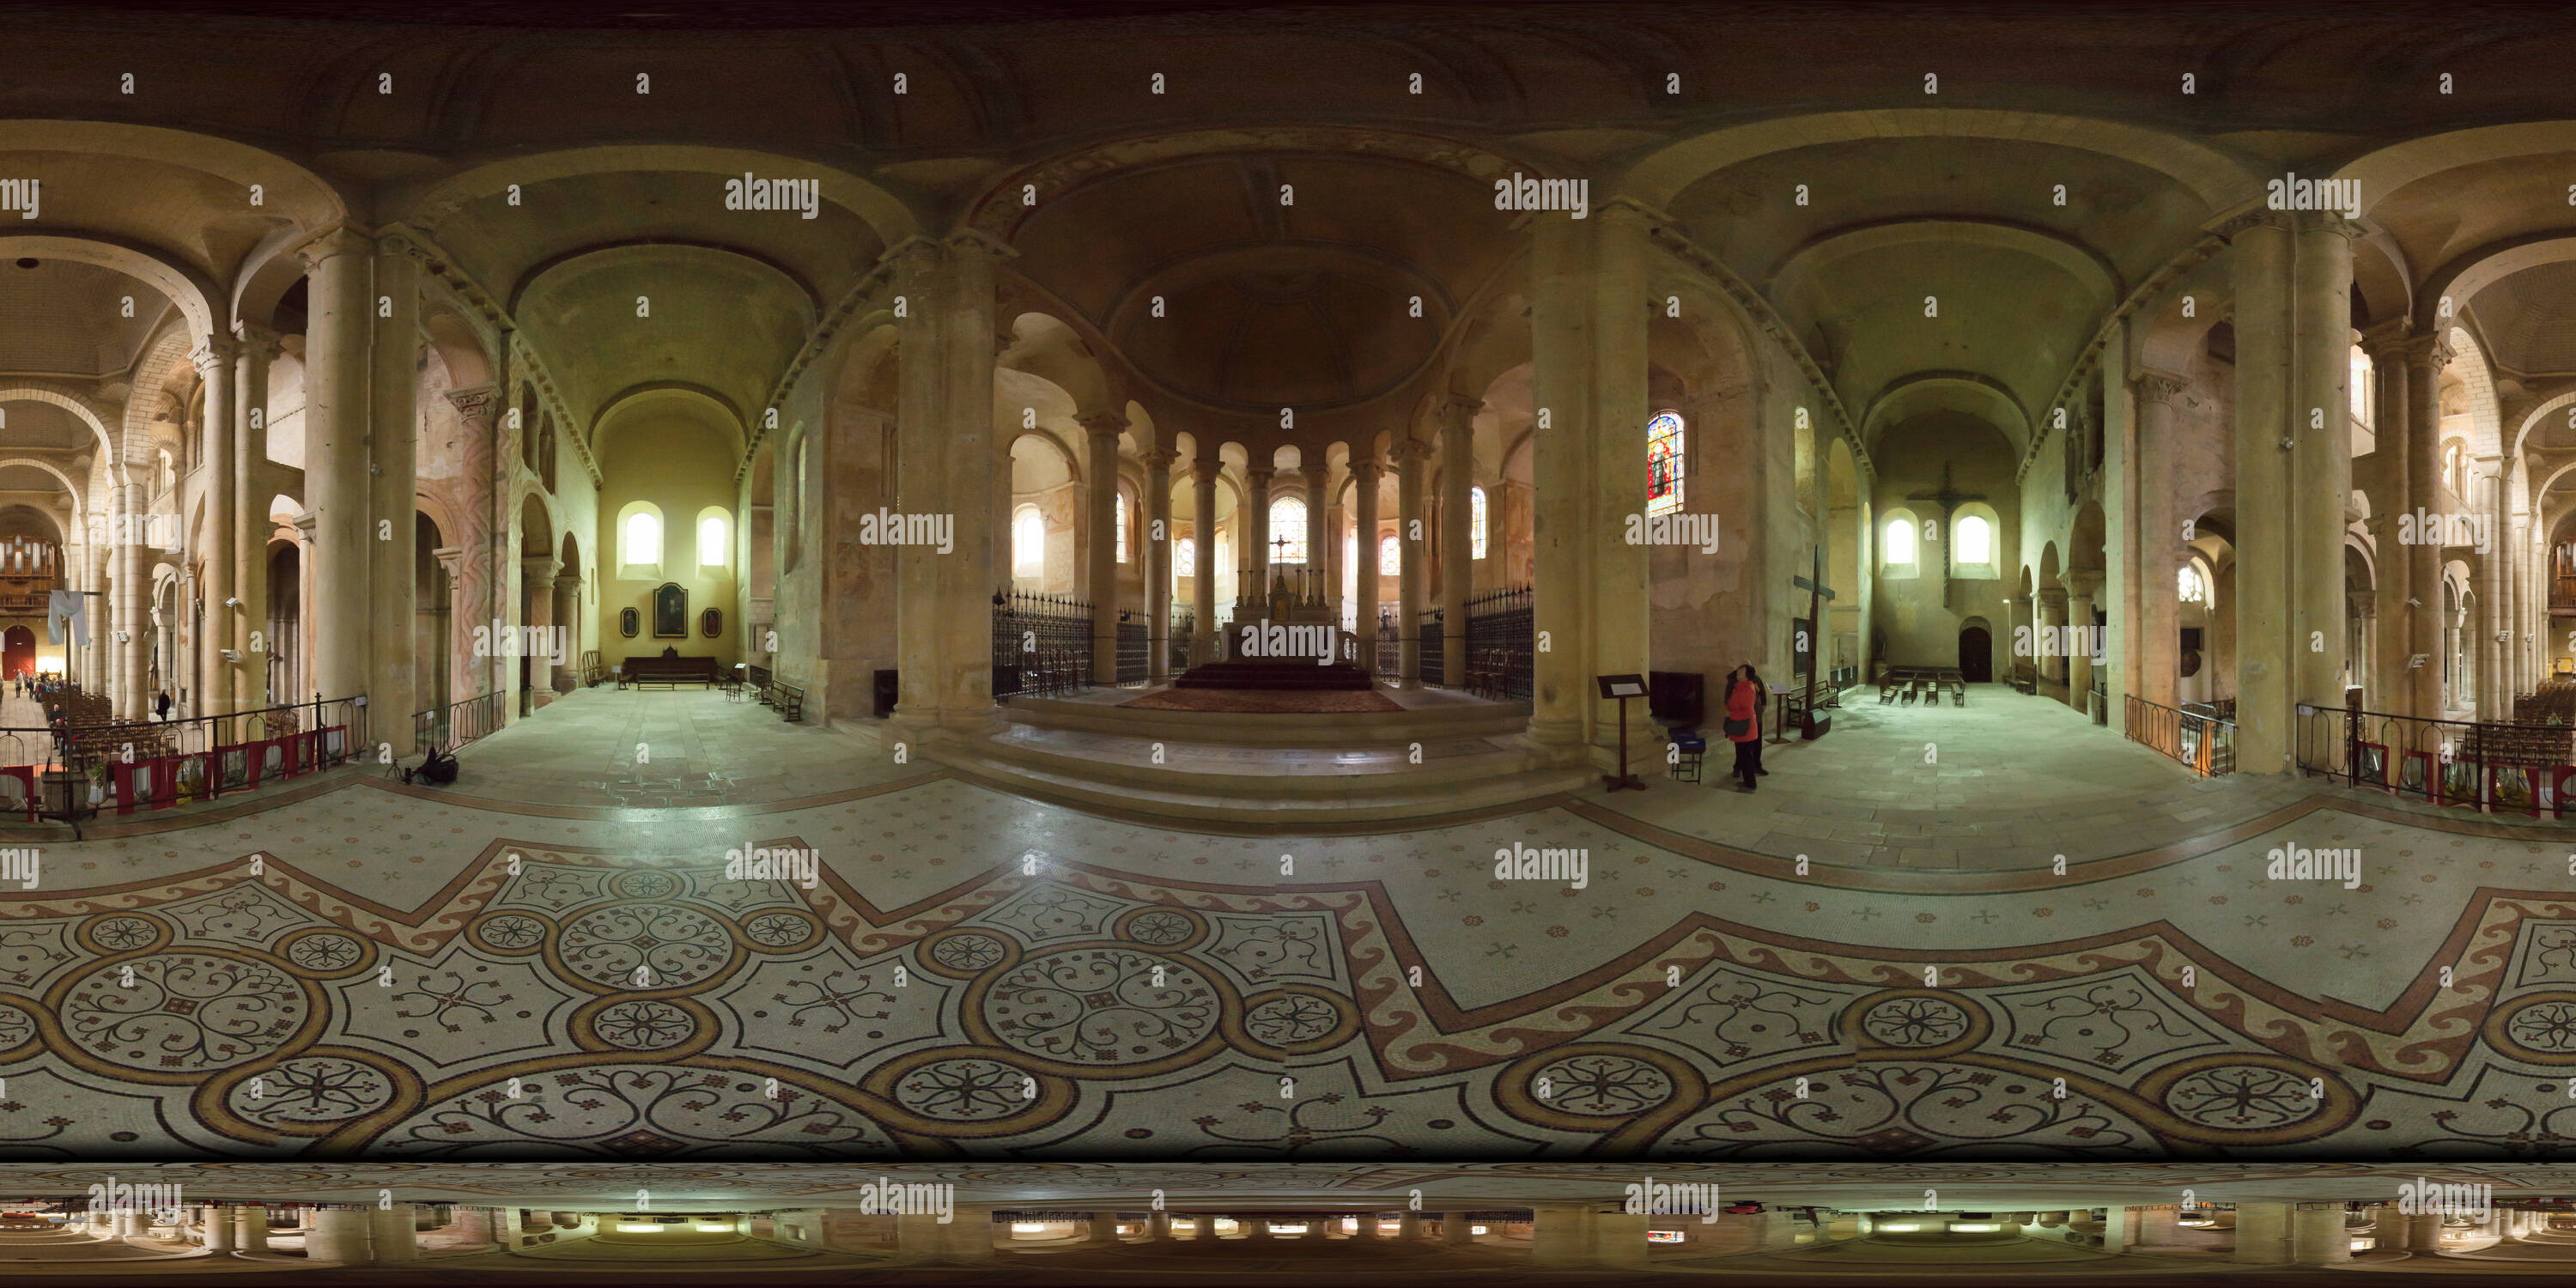 360 degree panoramic view of Eglise St. Hilaire, Poitiers, France, 2016-10, freehand